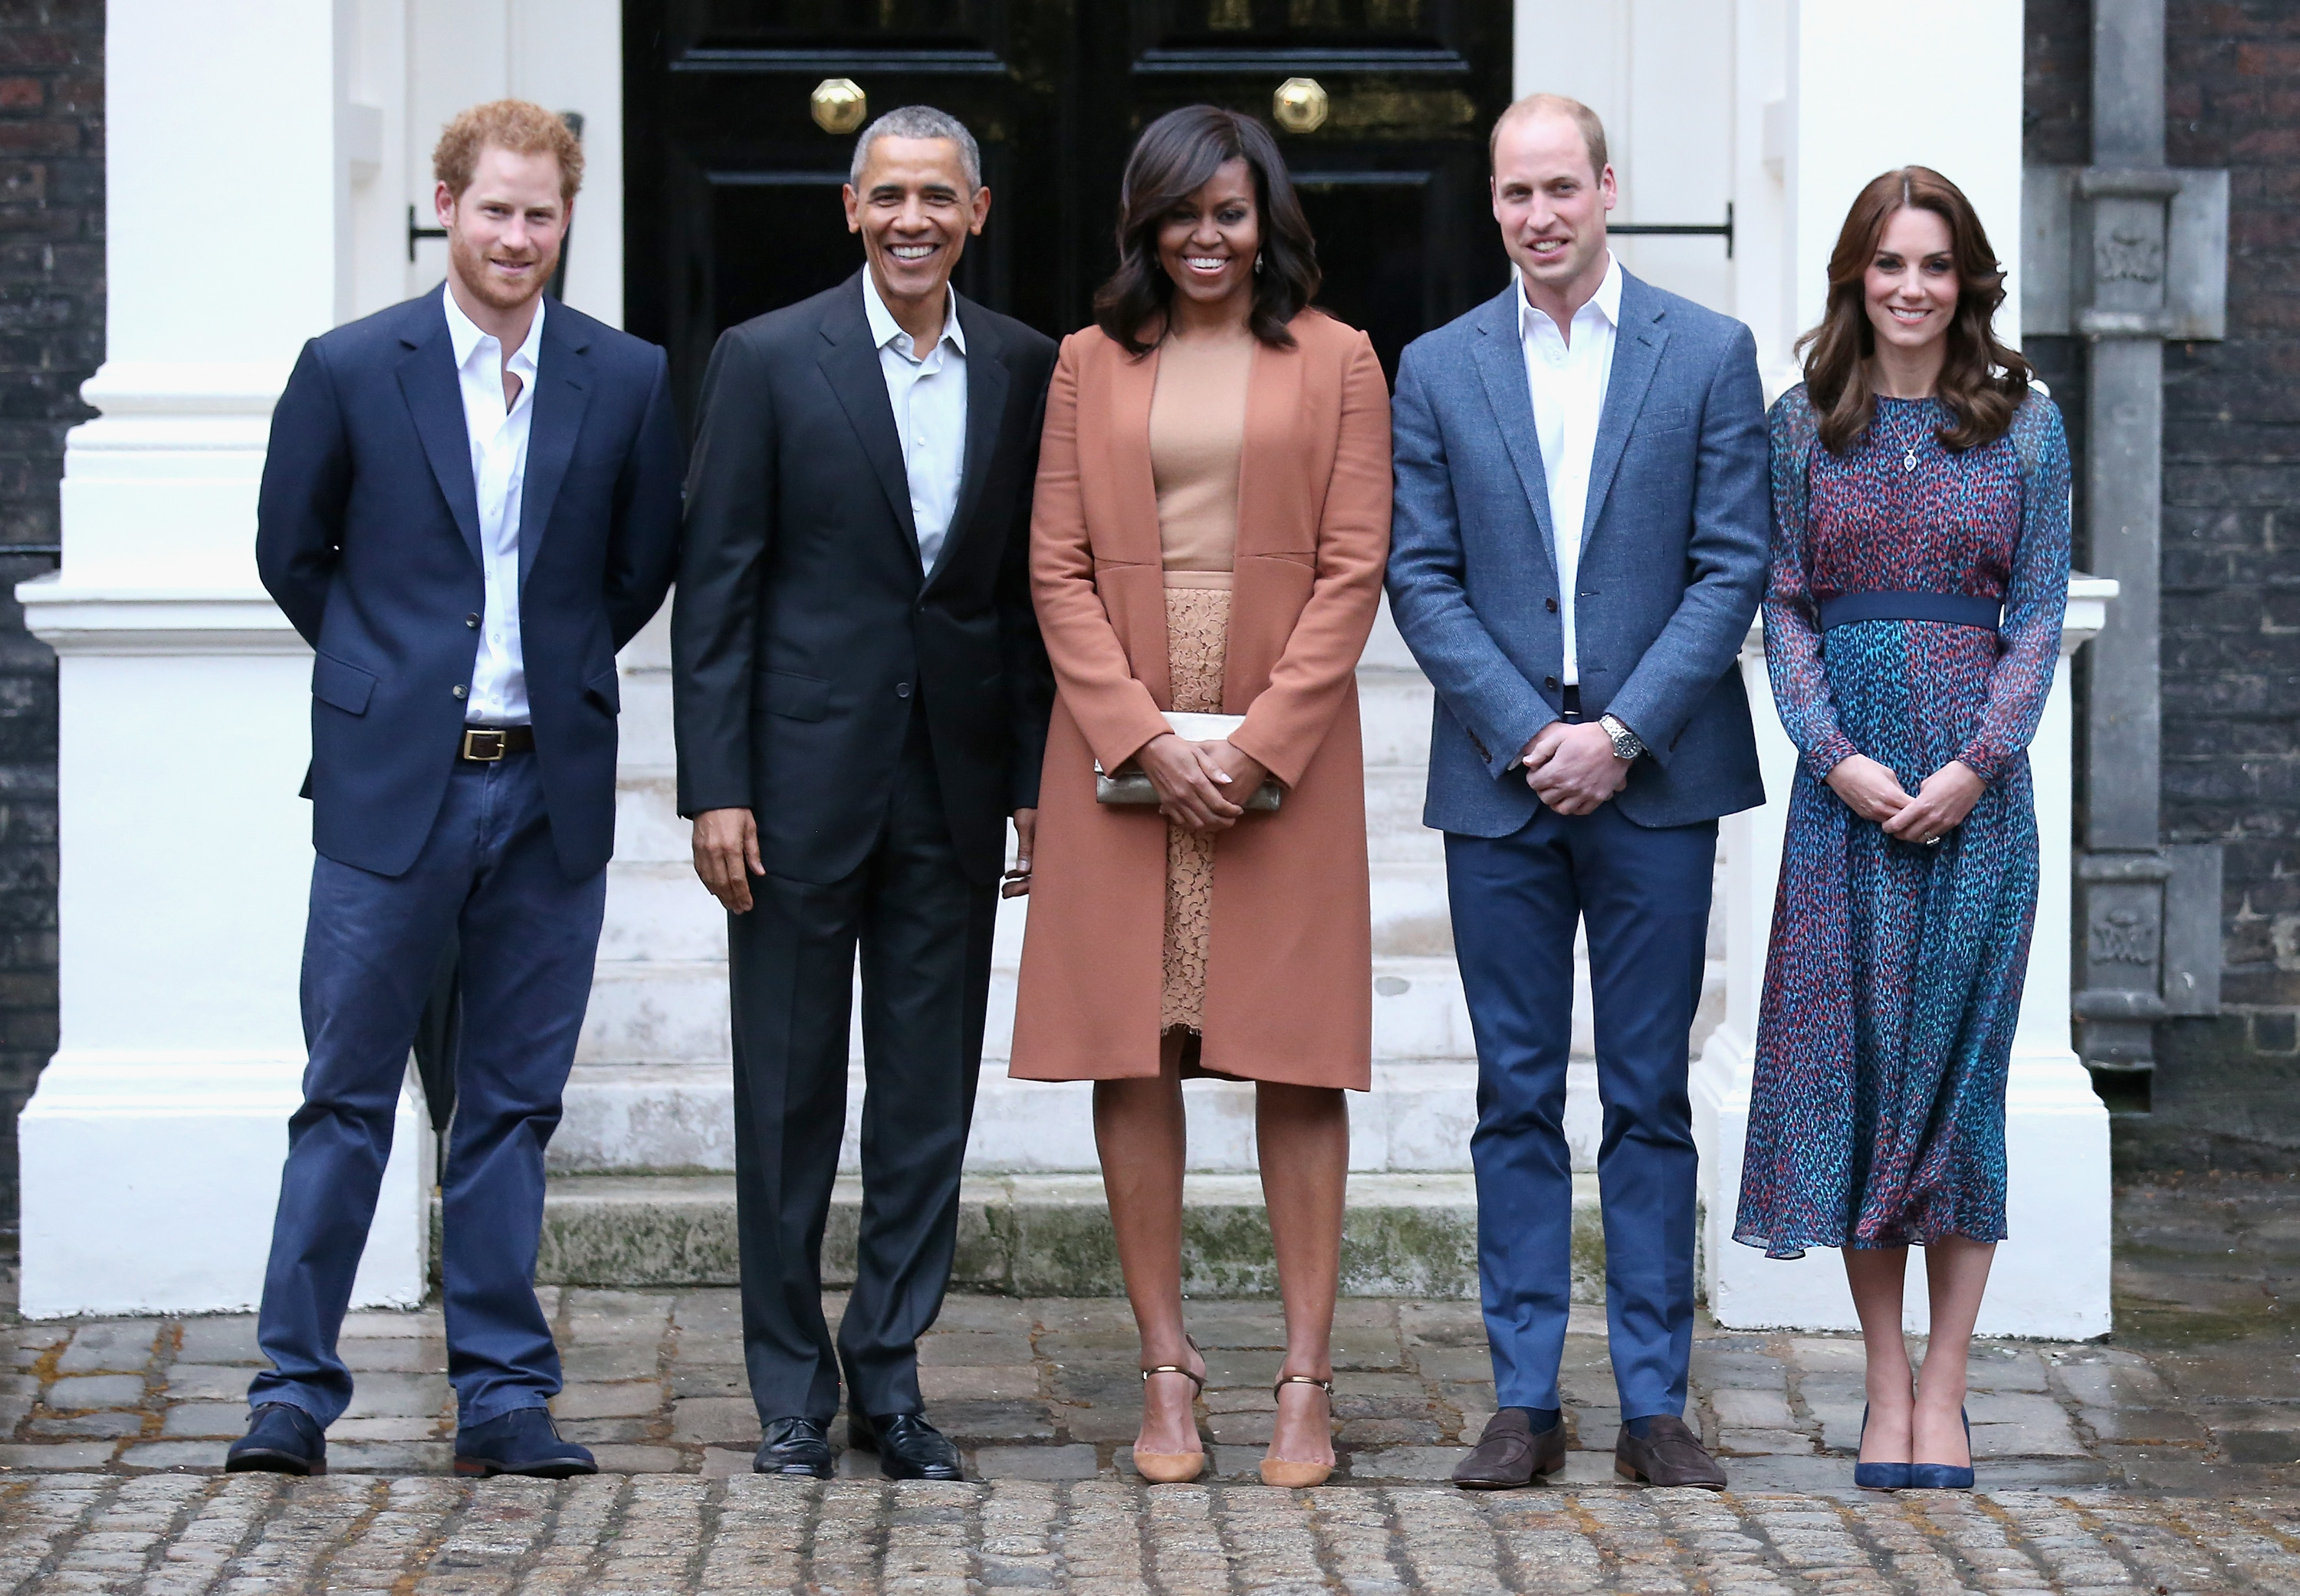 Prince Harry, US President Barack Obama, First Lady Michelle Obama, Prince William, Duke of Cambridge and Catherine, Duchess of Cambridge pose as they attend a dinner at Kensington Palace on April 22, 2016 in London, England. (Chris Jackson—Getty Images)